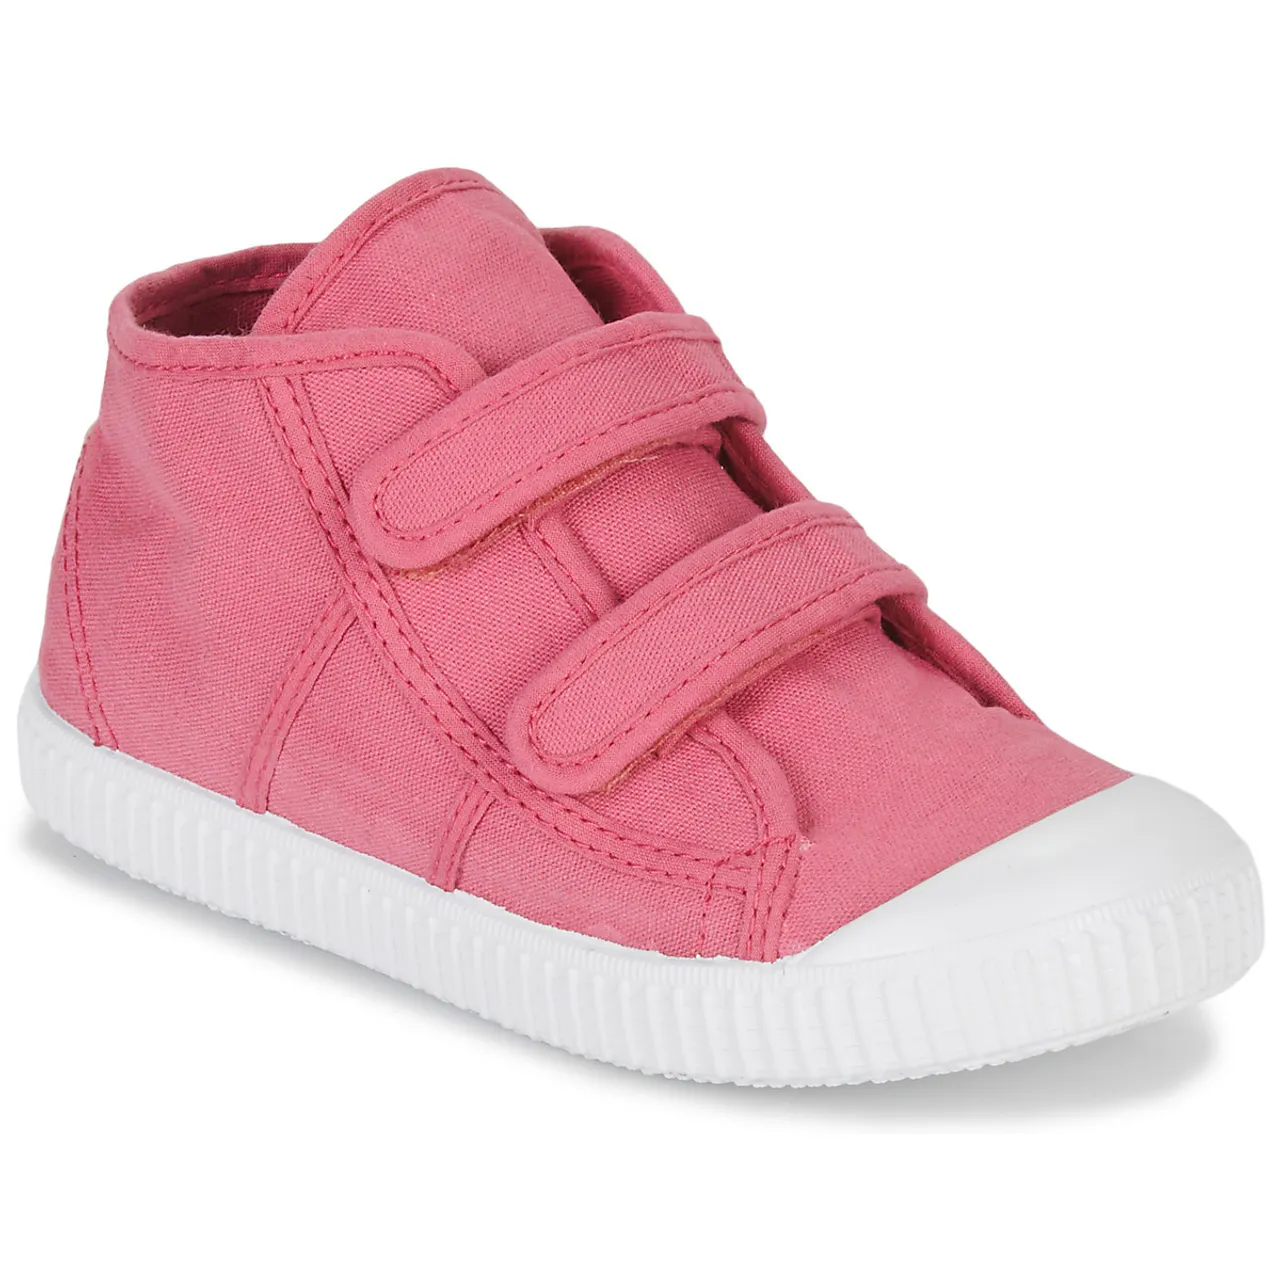 Victoria  BOTIN TIRAS LONA TINT  girls's Children's Shoes (High-top Trainers) in Pink